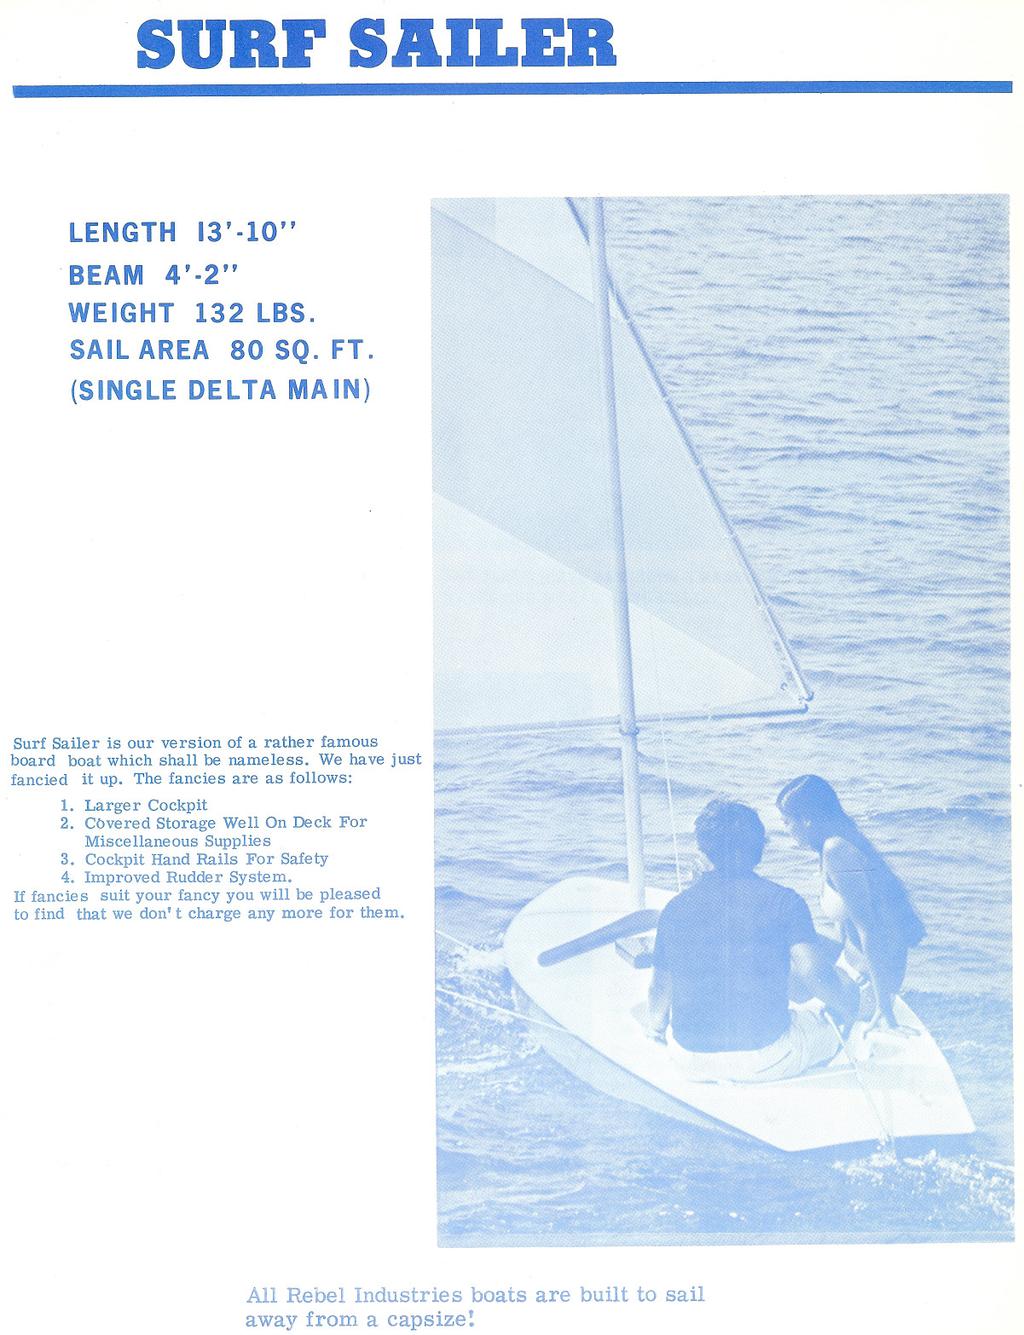 SURF SAILER LENGTH 13' -10" BEAM 4'-2" WEIGHT 132 LBS. SAIL AREA 80 SQ. FT. (SINGLE DELTA MAIN) Surf Sailer is our version of a rather famous board boat which shall be nameless.